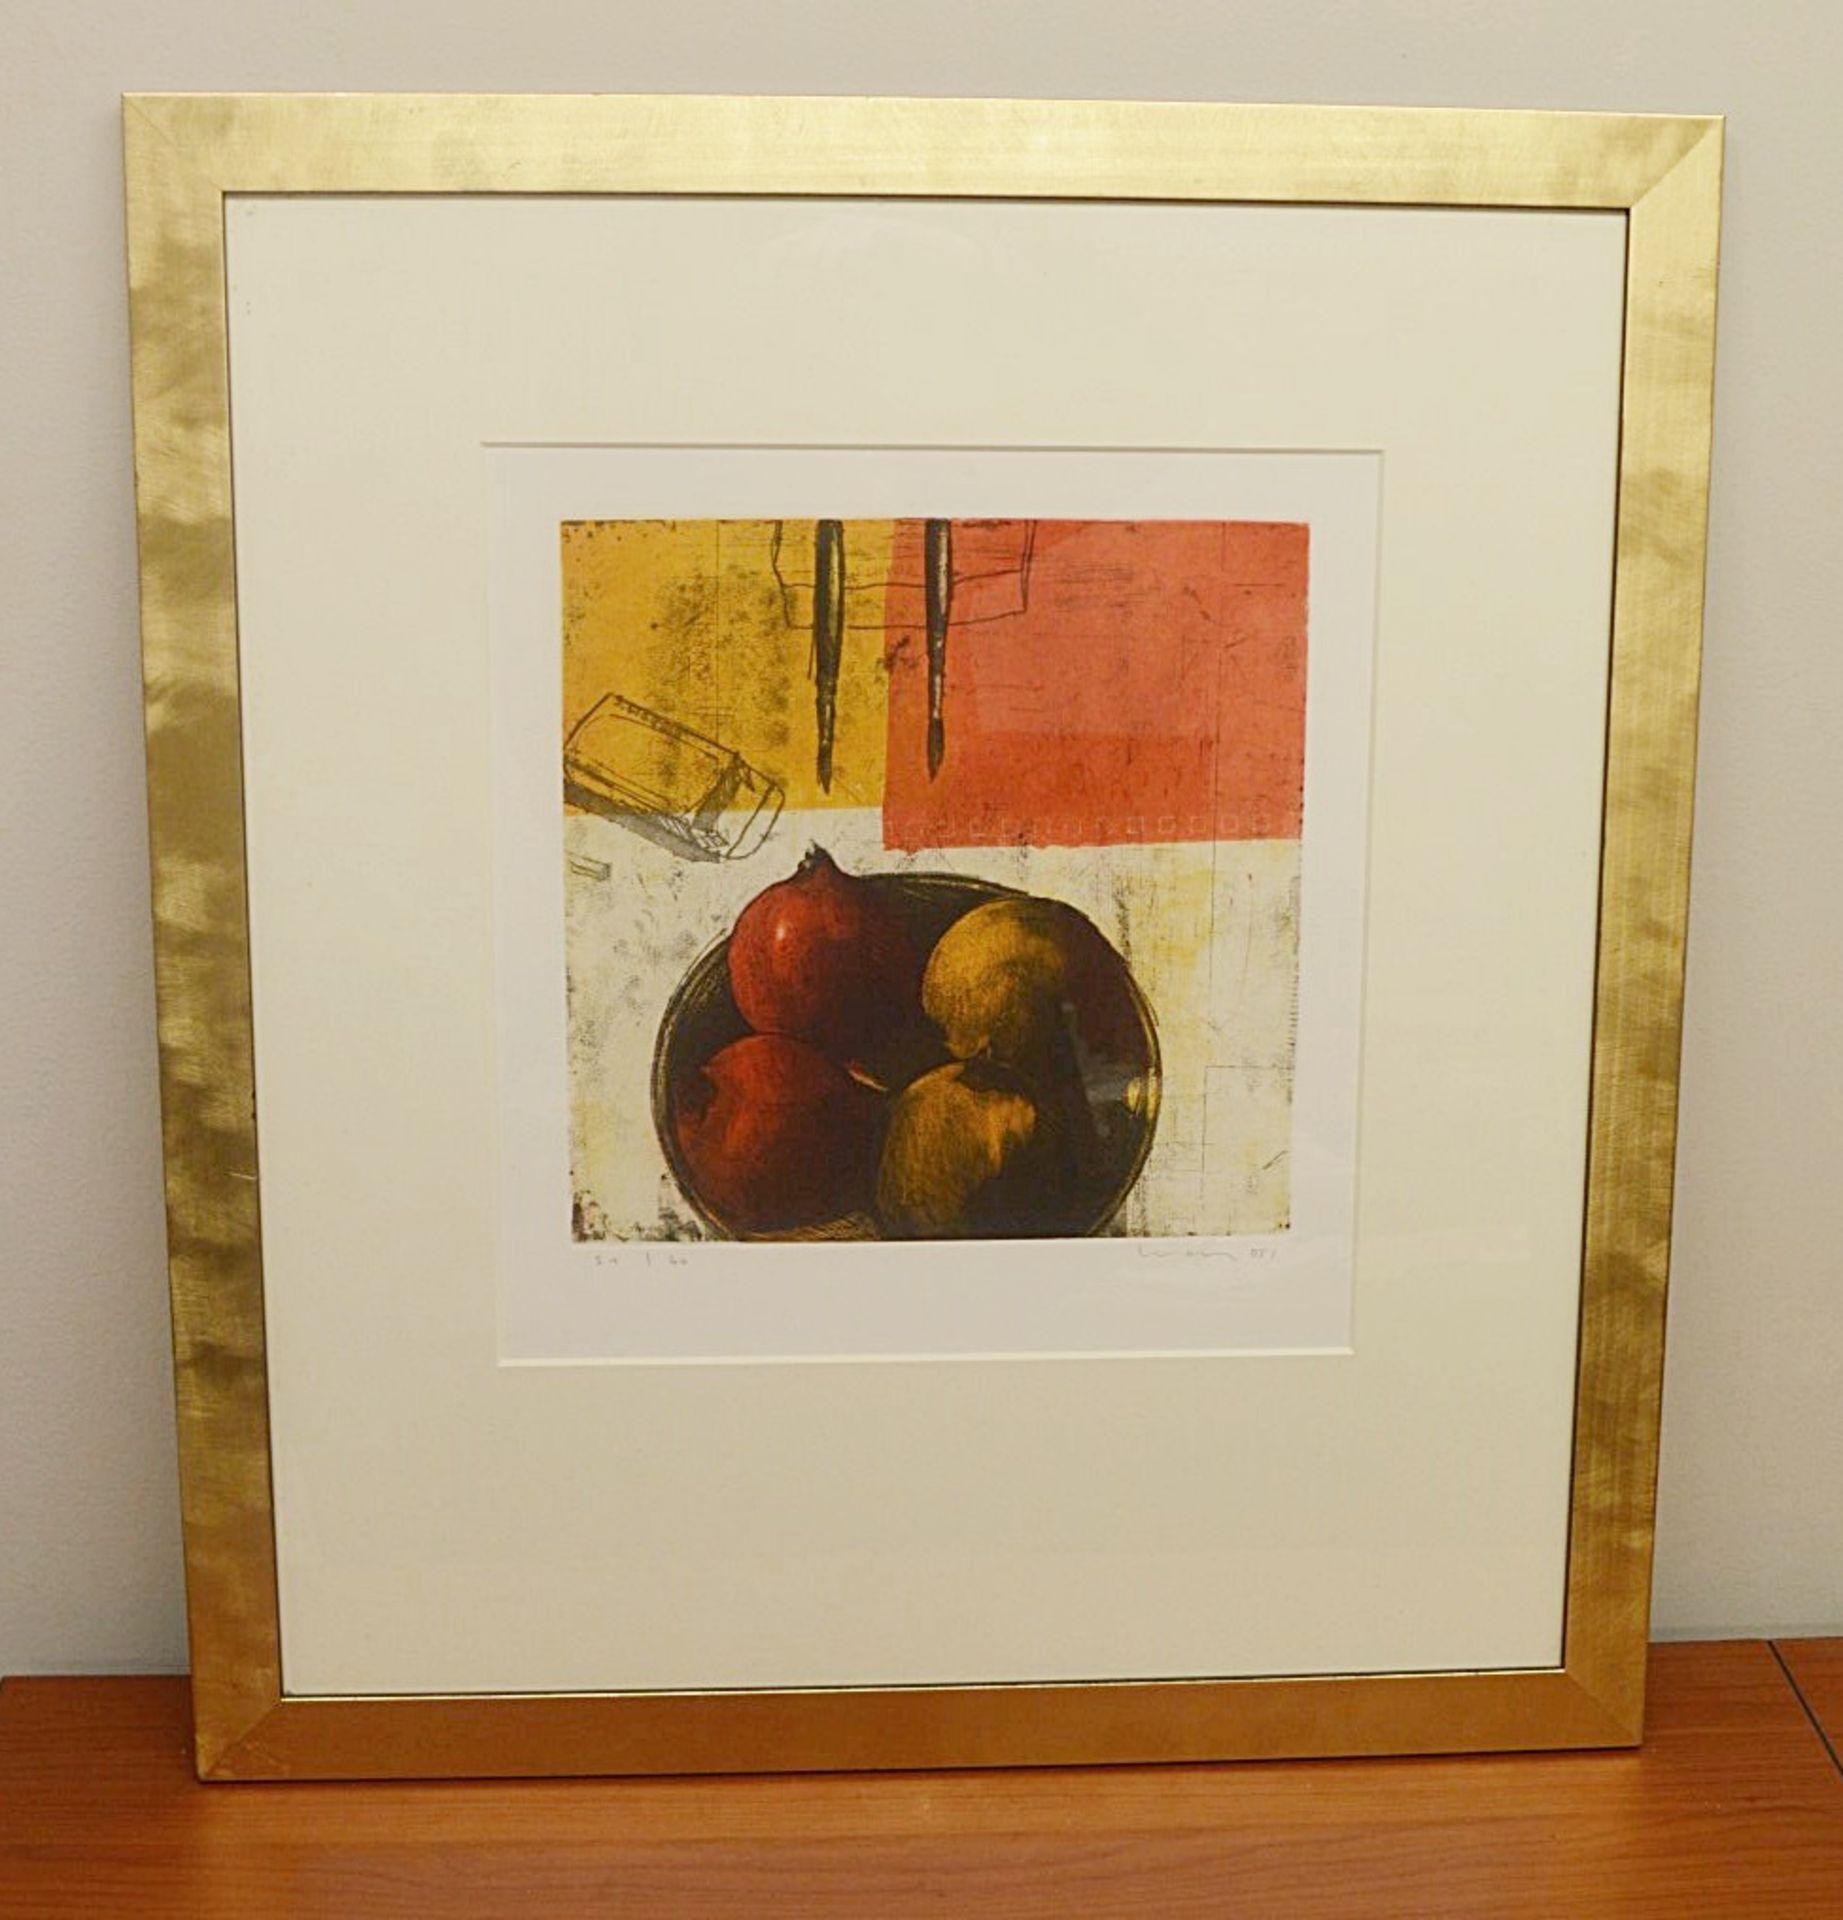 1 x Framed Contemporary Artwork - Signed And Numbered By The Artist 'KURT MAYER' - Dimensions: 62